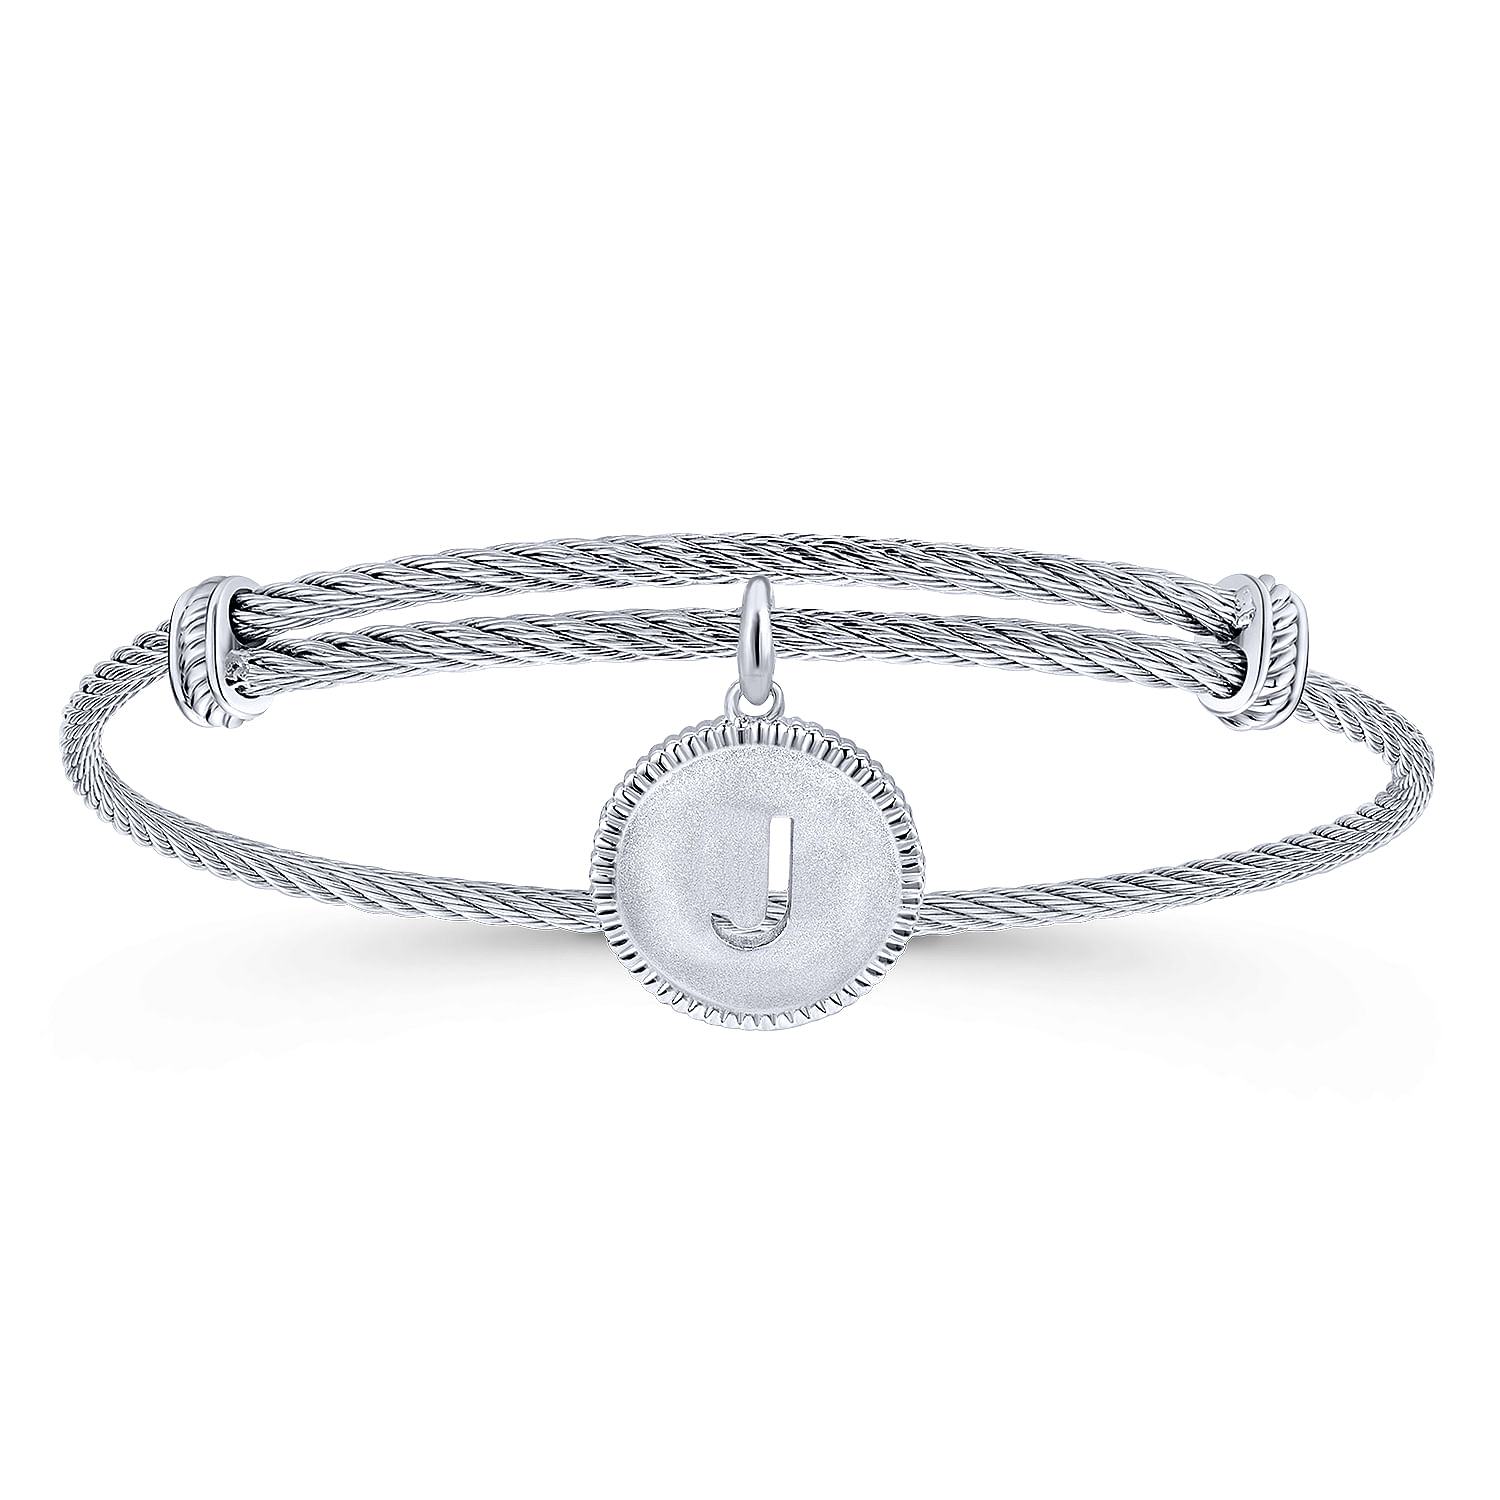 Adjustable Twisted Cable Stainless Steel Bangle with Sterling Silver J Initial Charm